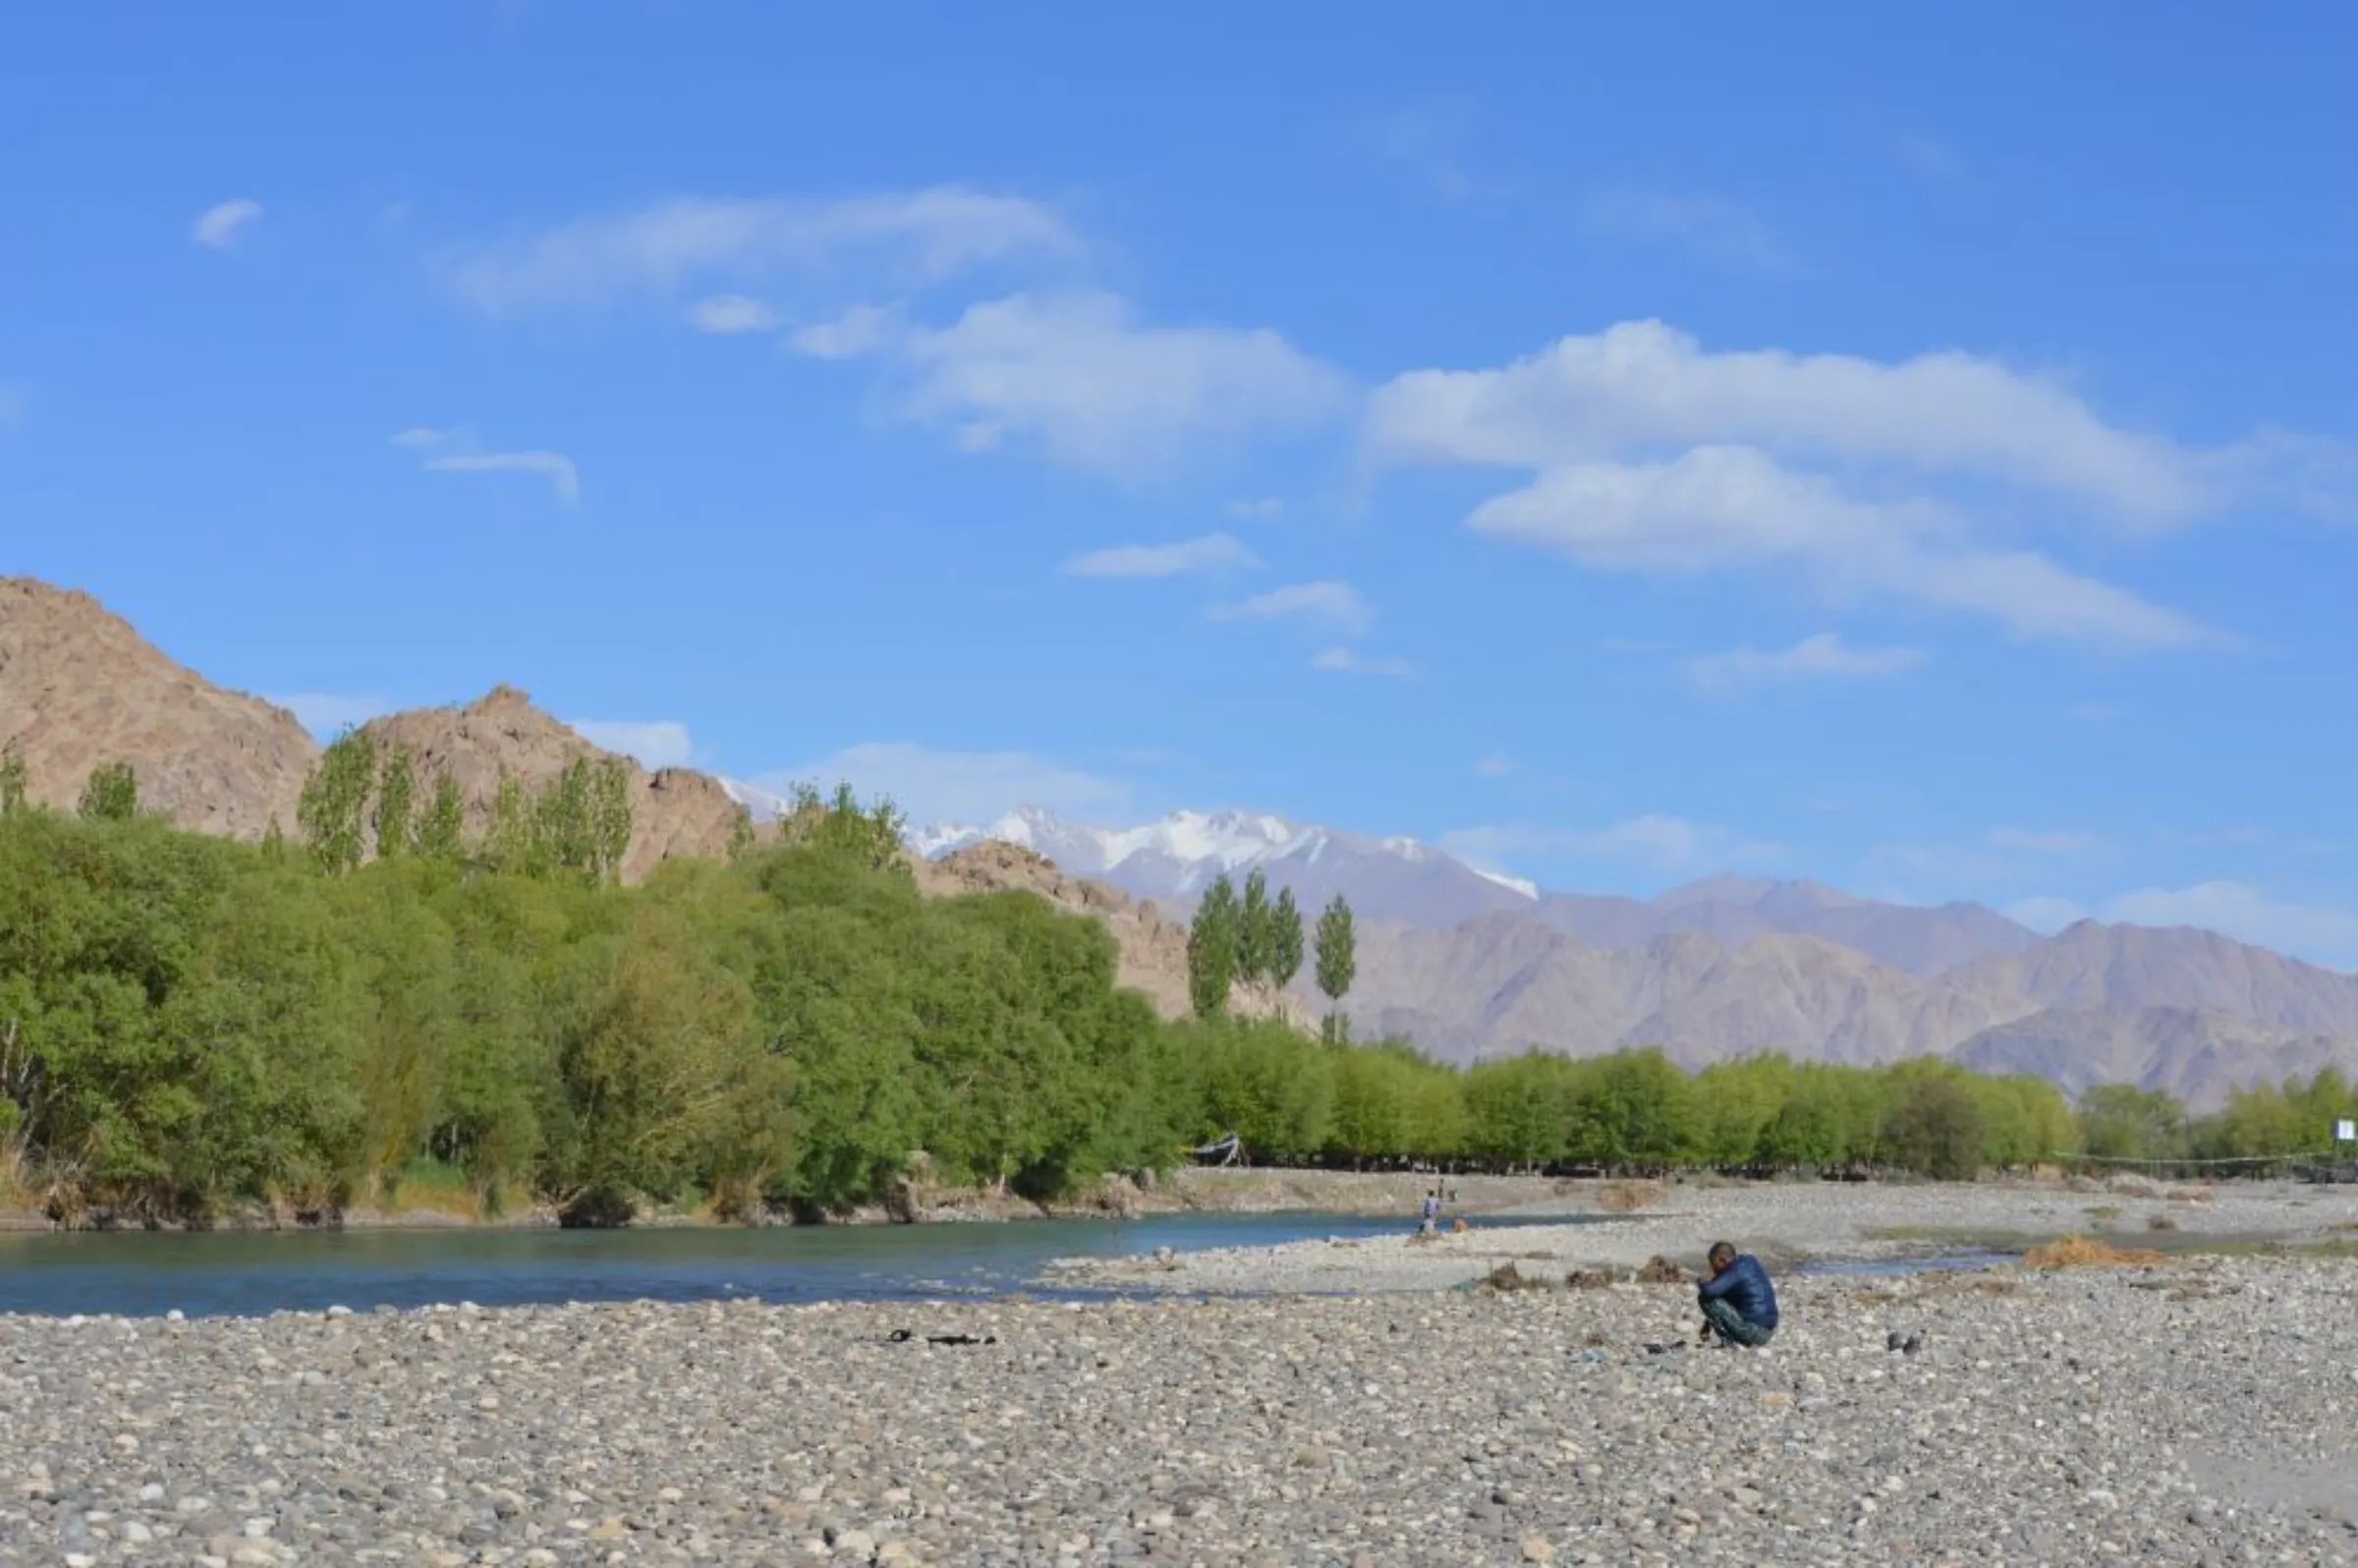 Indus River in Ladakh which flows to Pakistan, June 3, 2018